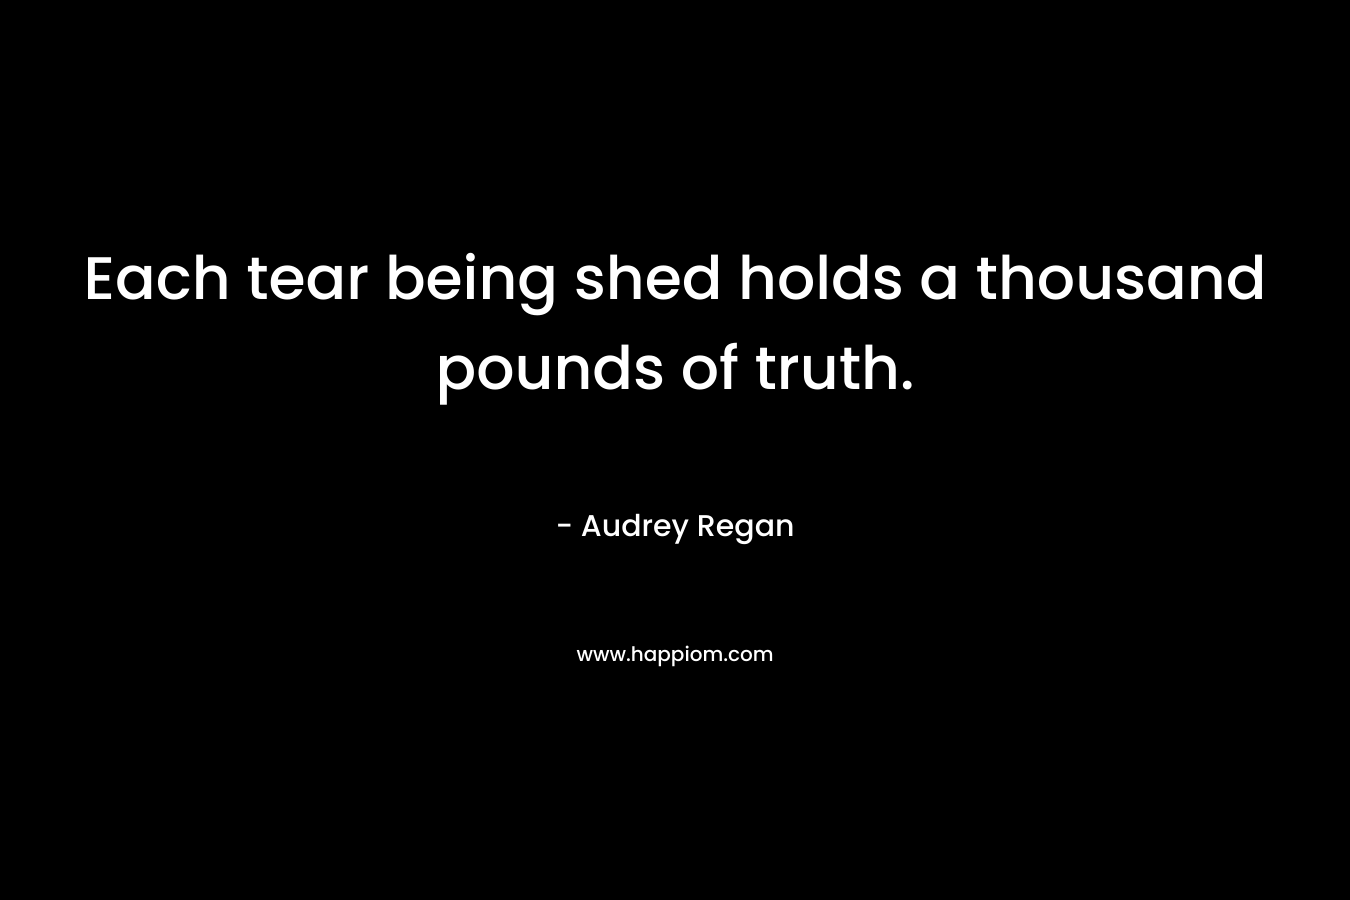 Each tear being shed holds a thousand pounds of truth.